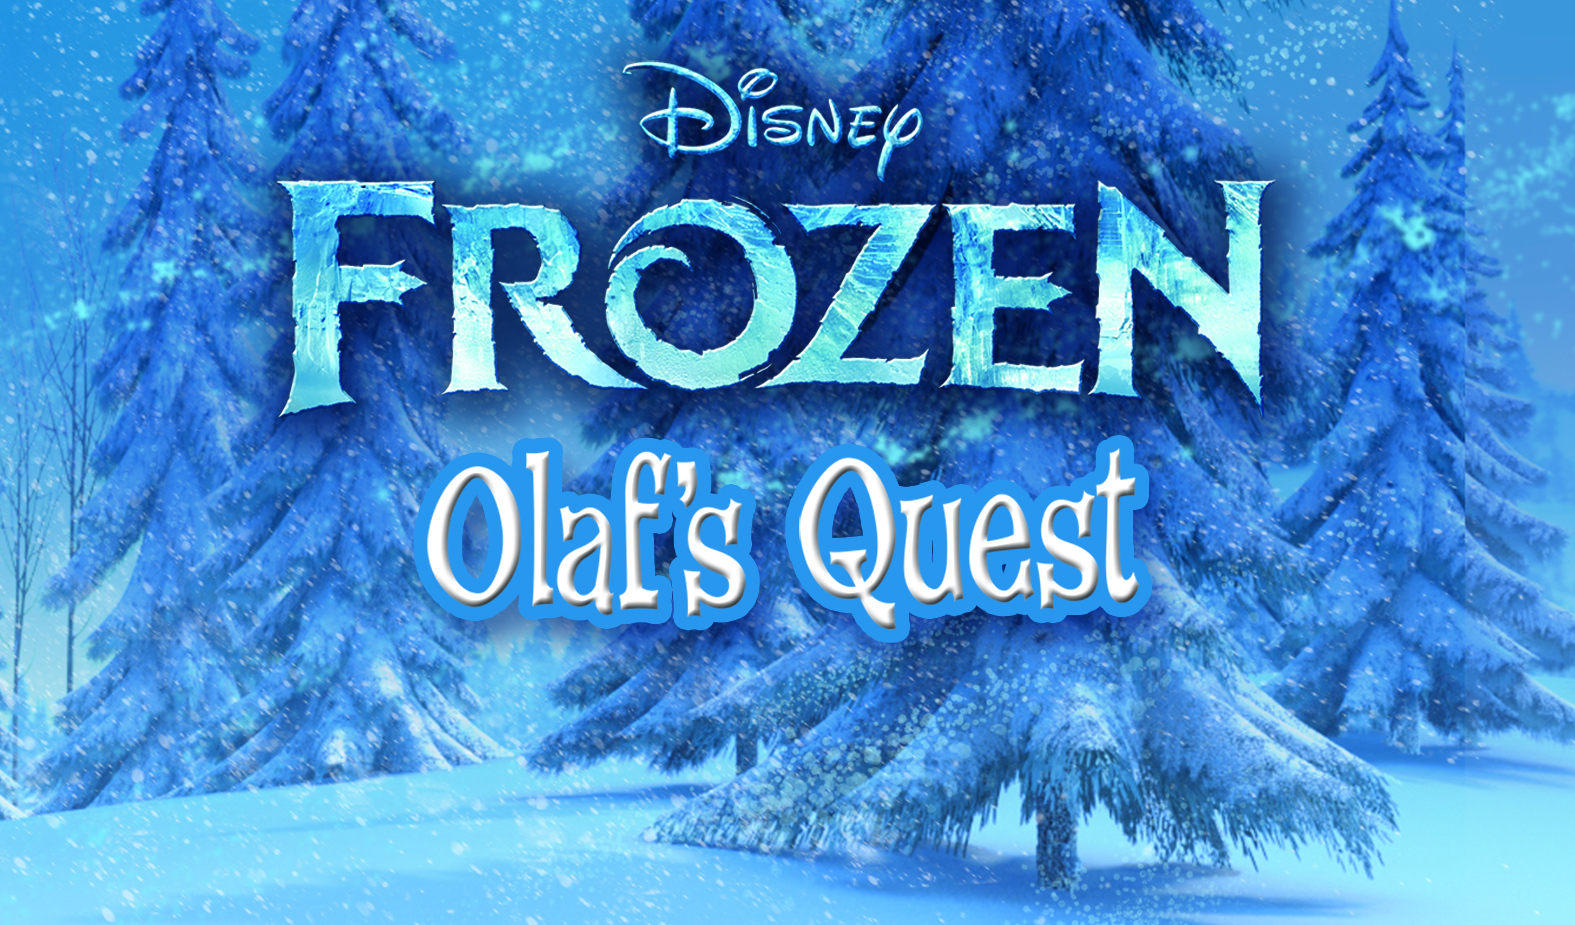 Warm Up This Season with New Video Game ‘Disney Frozen: Olaf’s Quest’